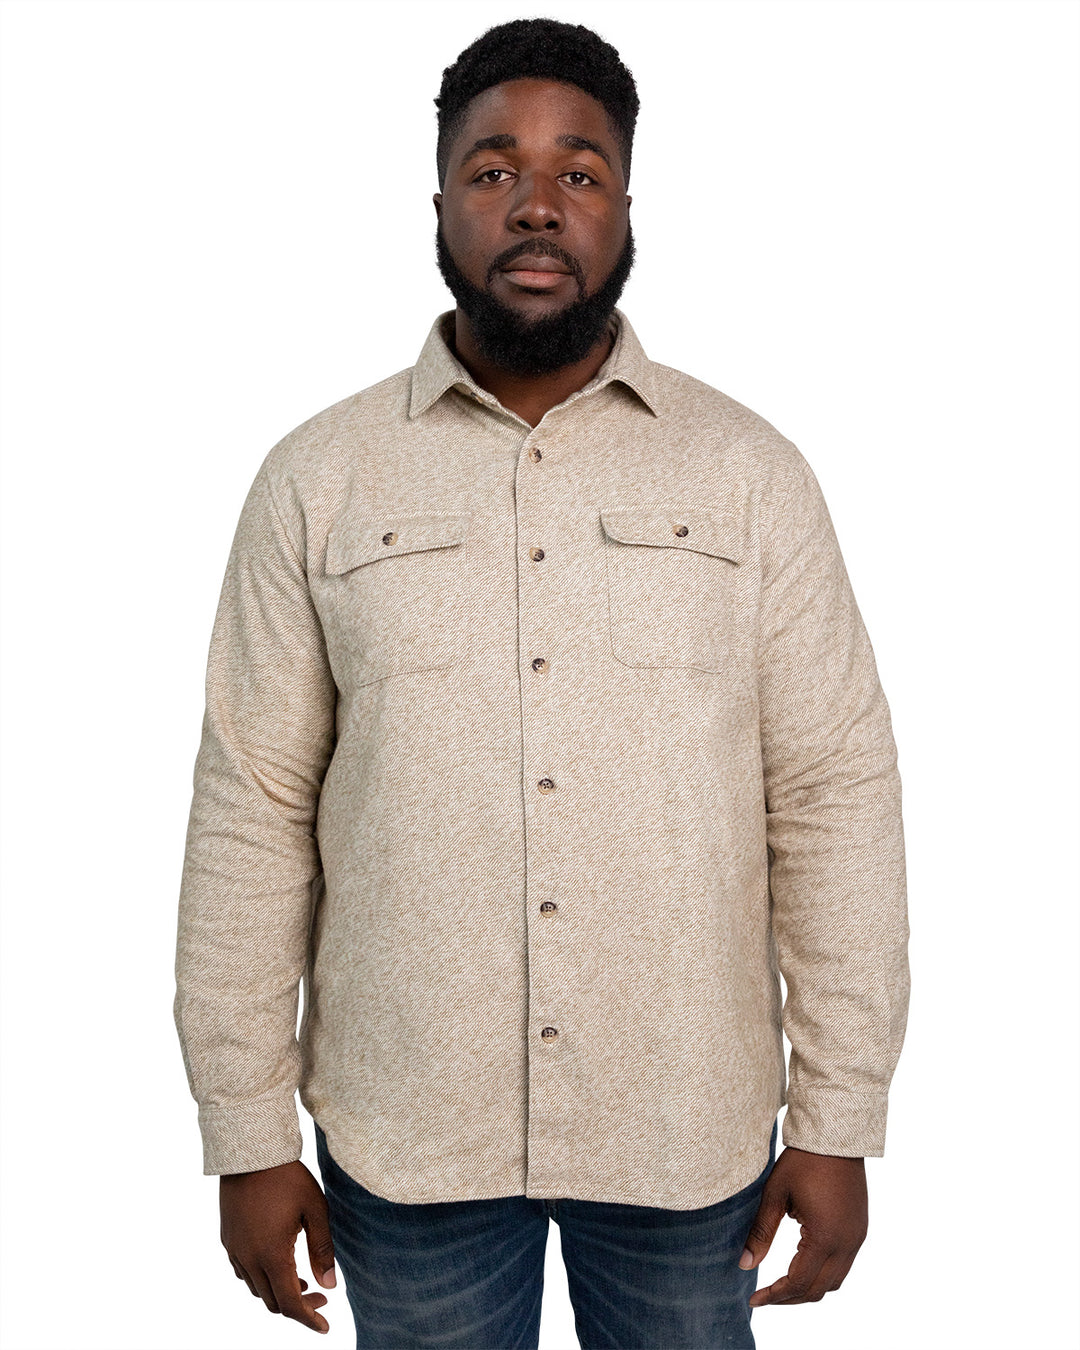 Relaxed Fitting Flannel Shirt for Men, 100% Heavyweight Cotton Shirt in Seagrass